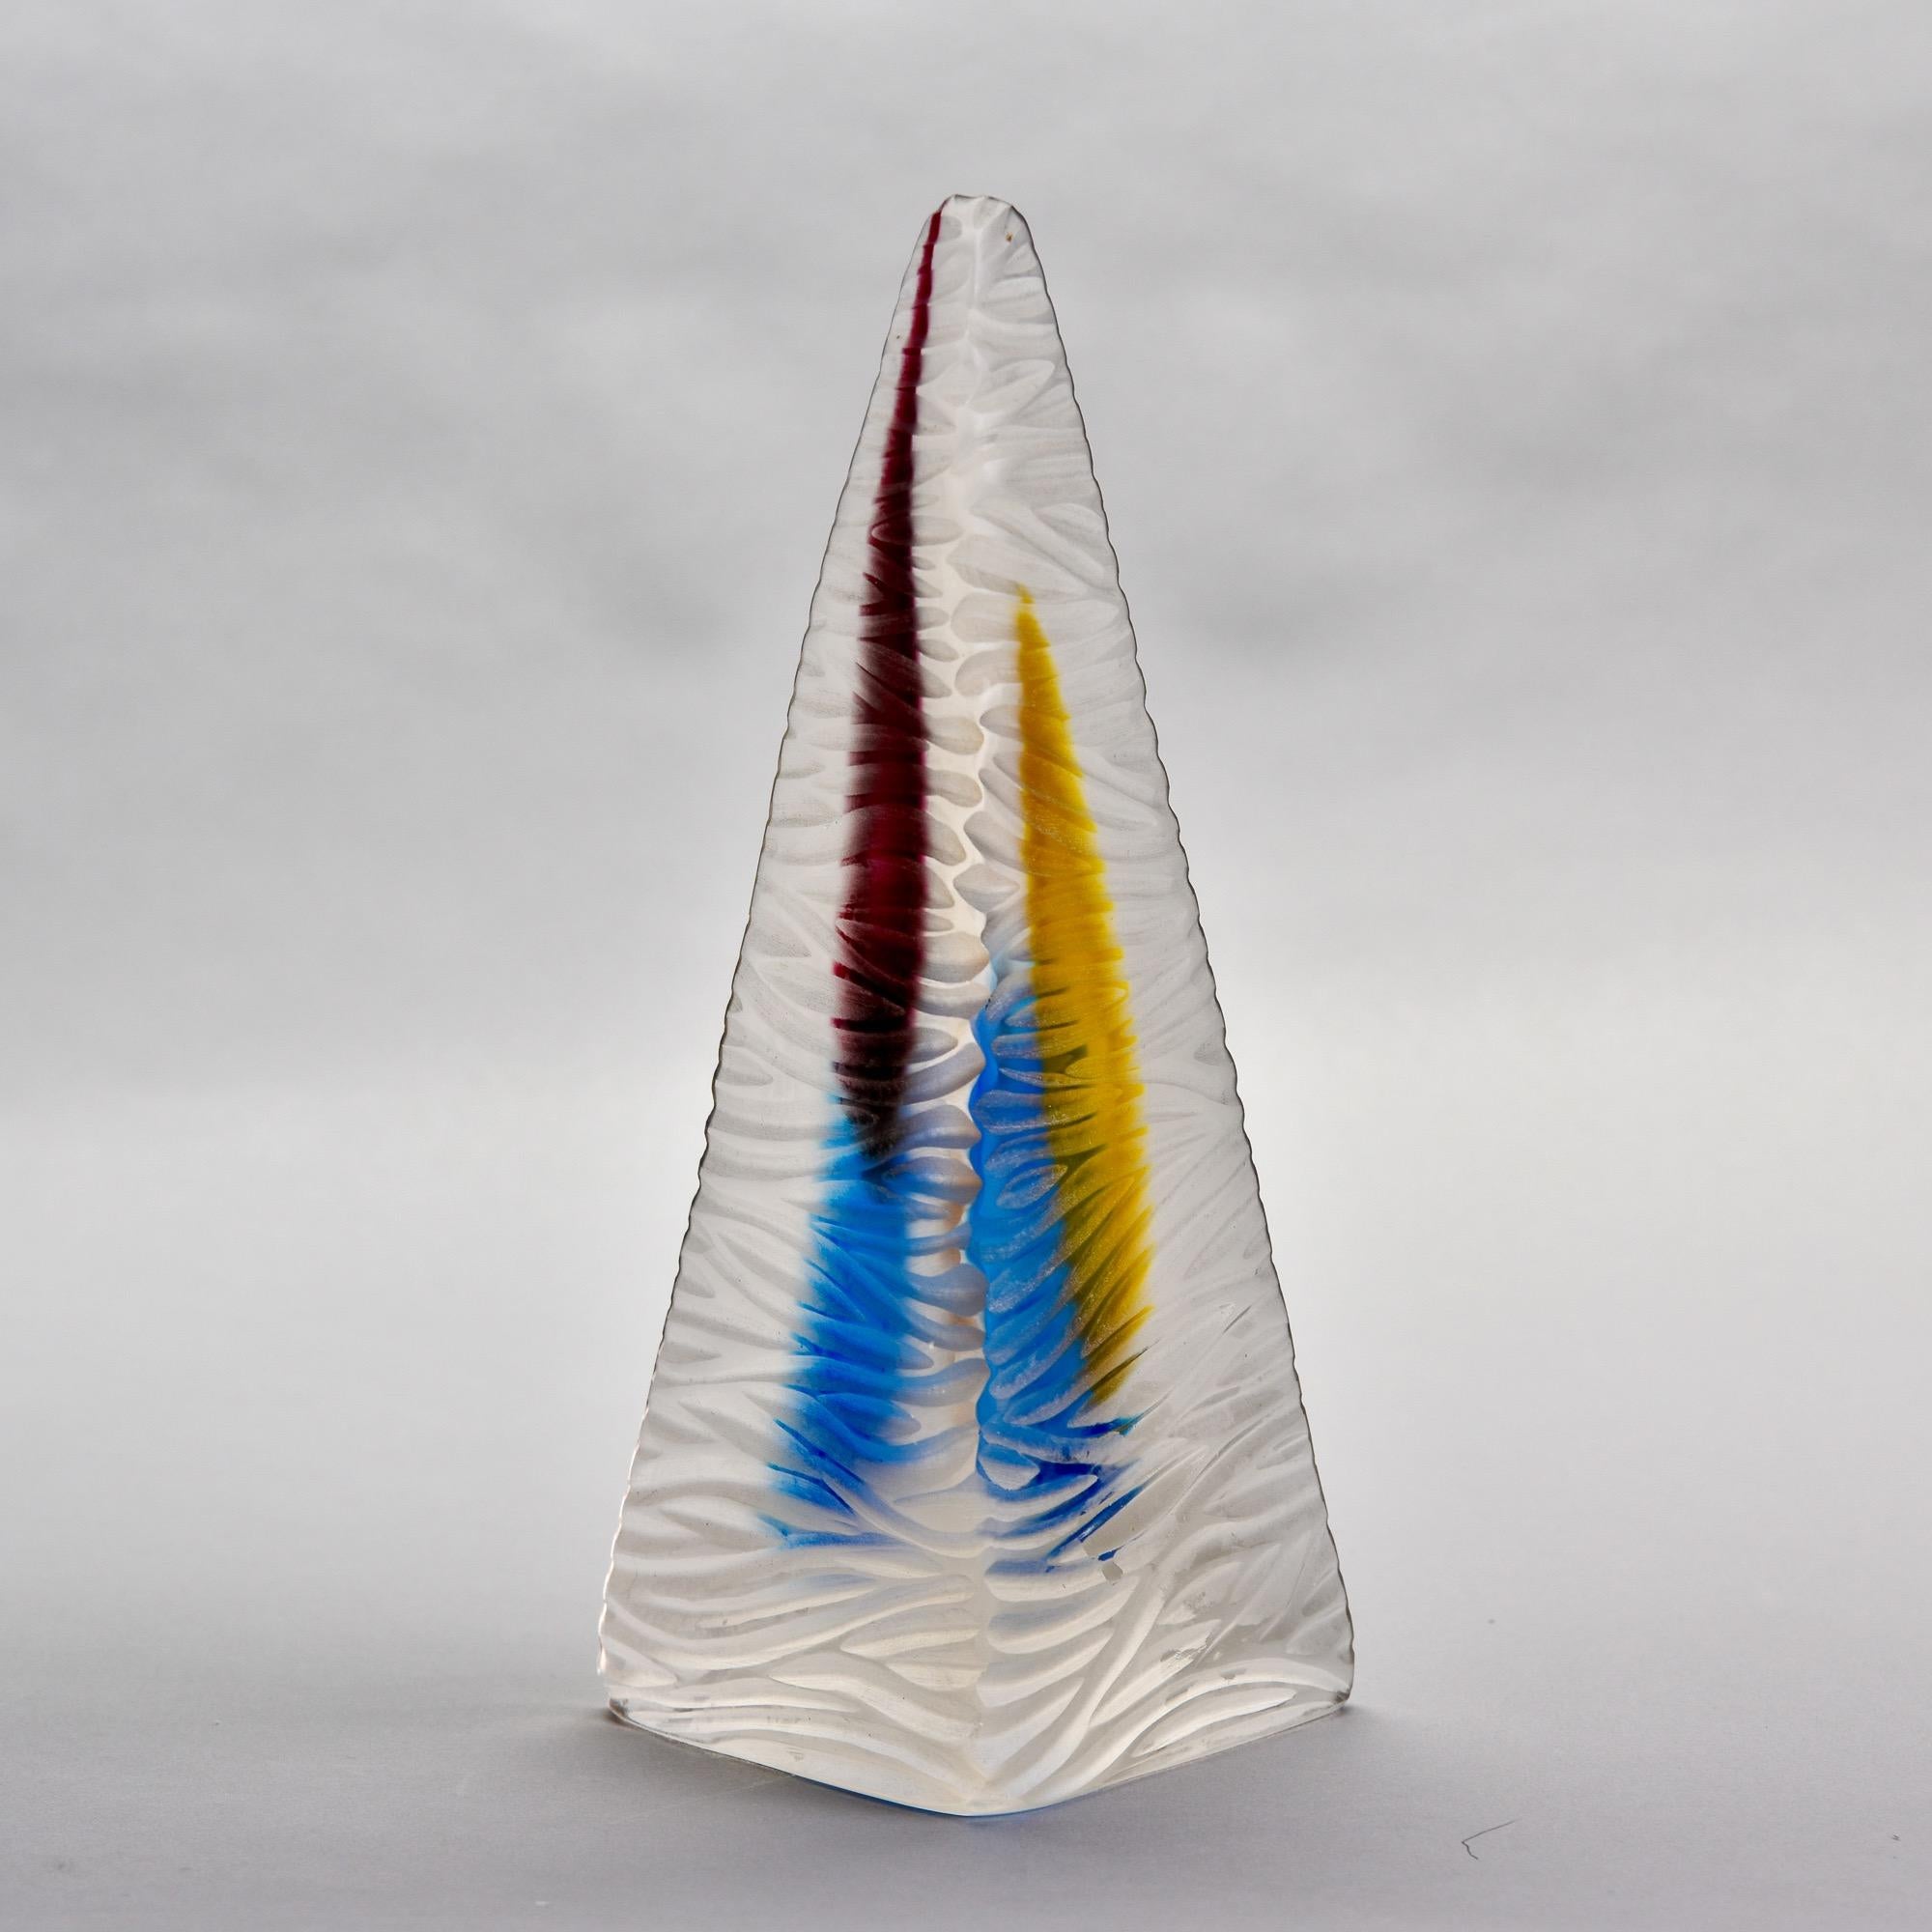 Circa 1980s three sided Murano glass battuto style pyramid with internal streaks of color. Etched Rossetto signature on underside of base. Very good vintage condition with minor shelf wear to base - no flaws found. 
 